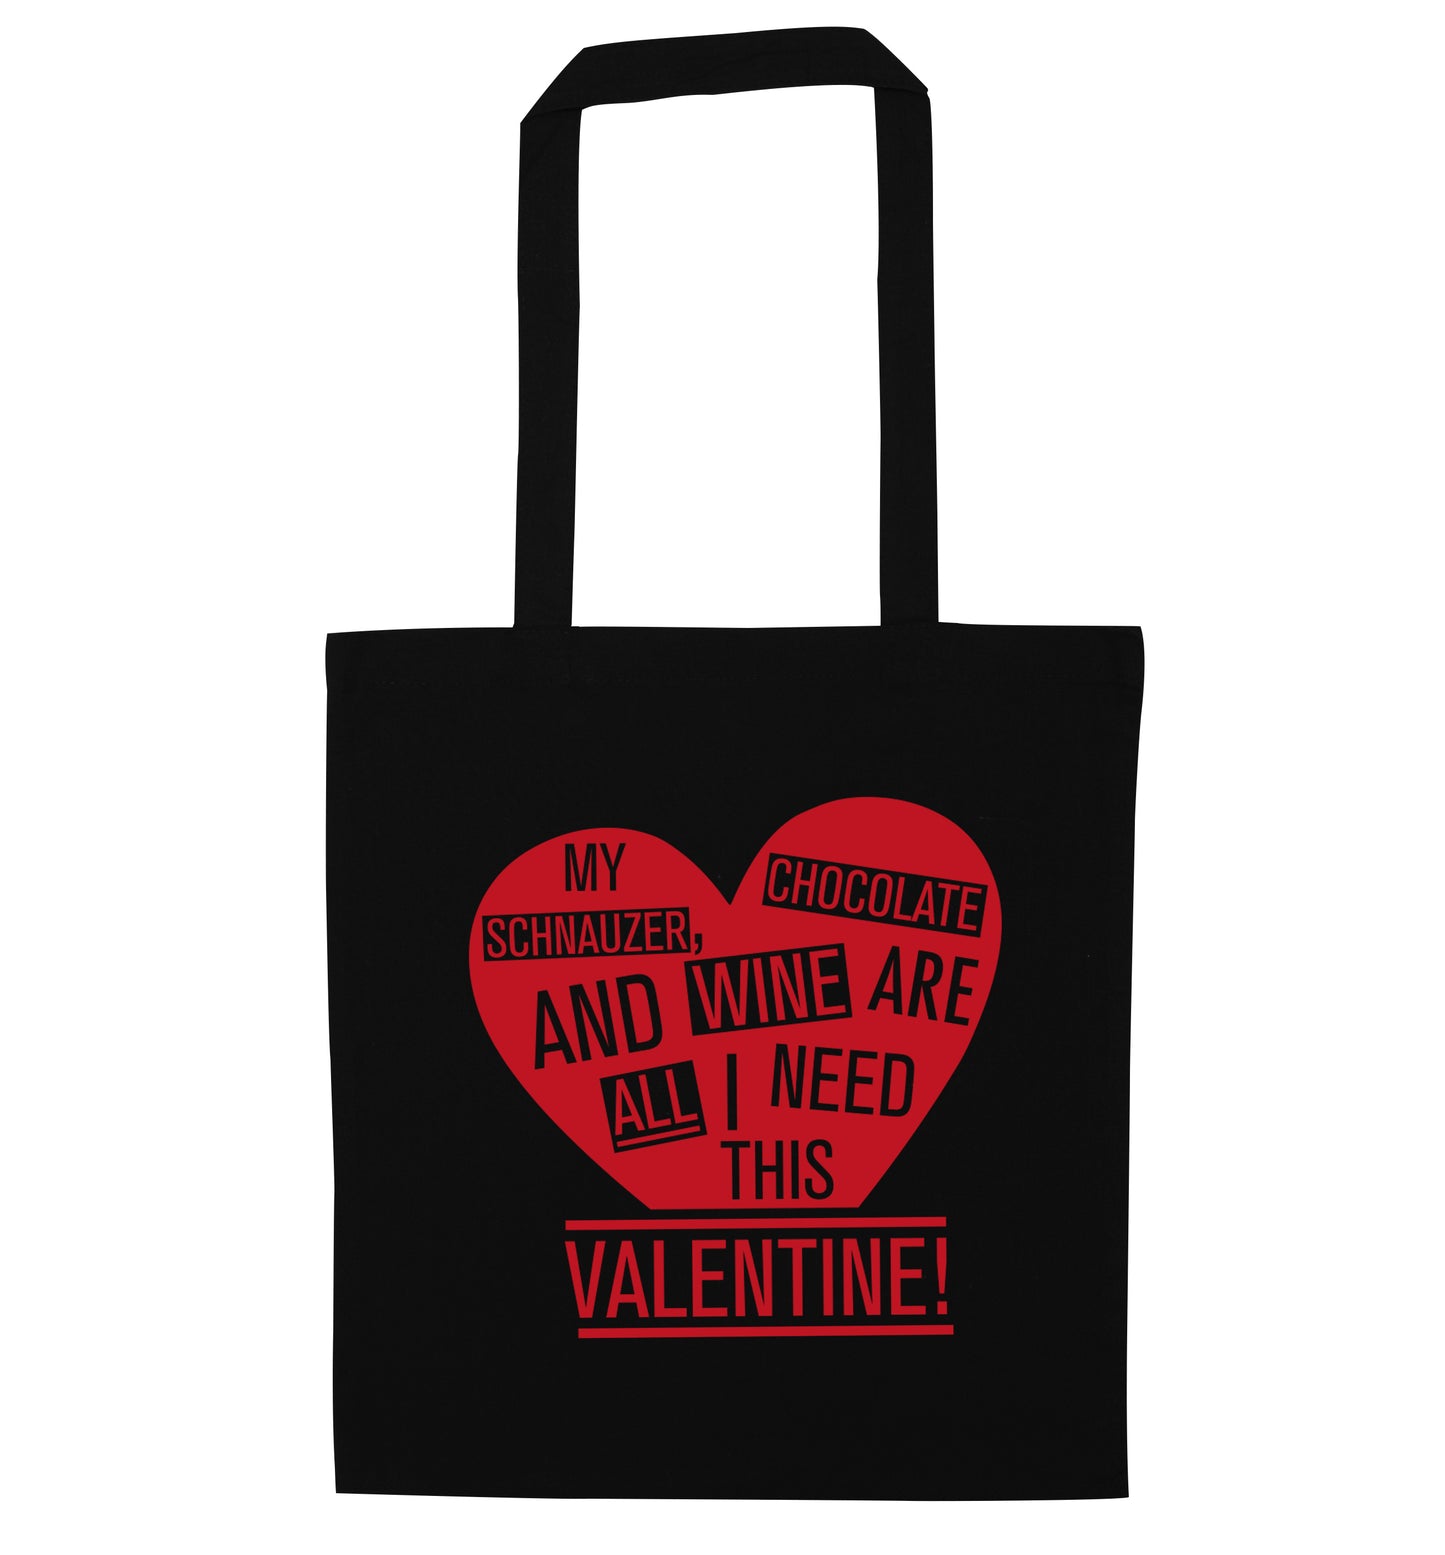 My schnauzer, chocolate and wine are all I need this valentine! black tote bag